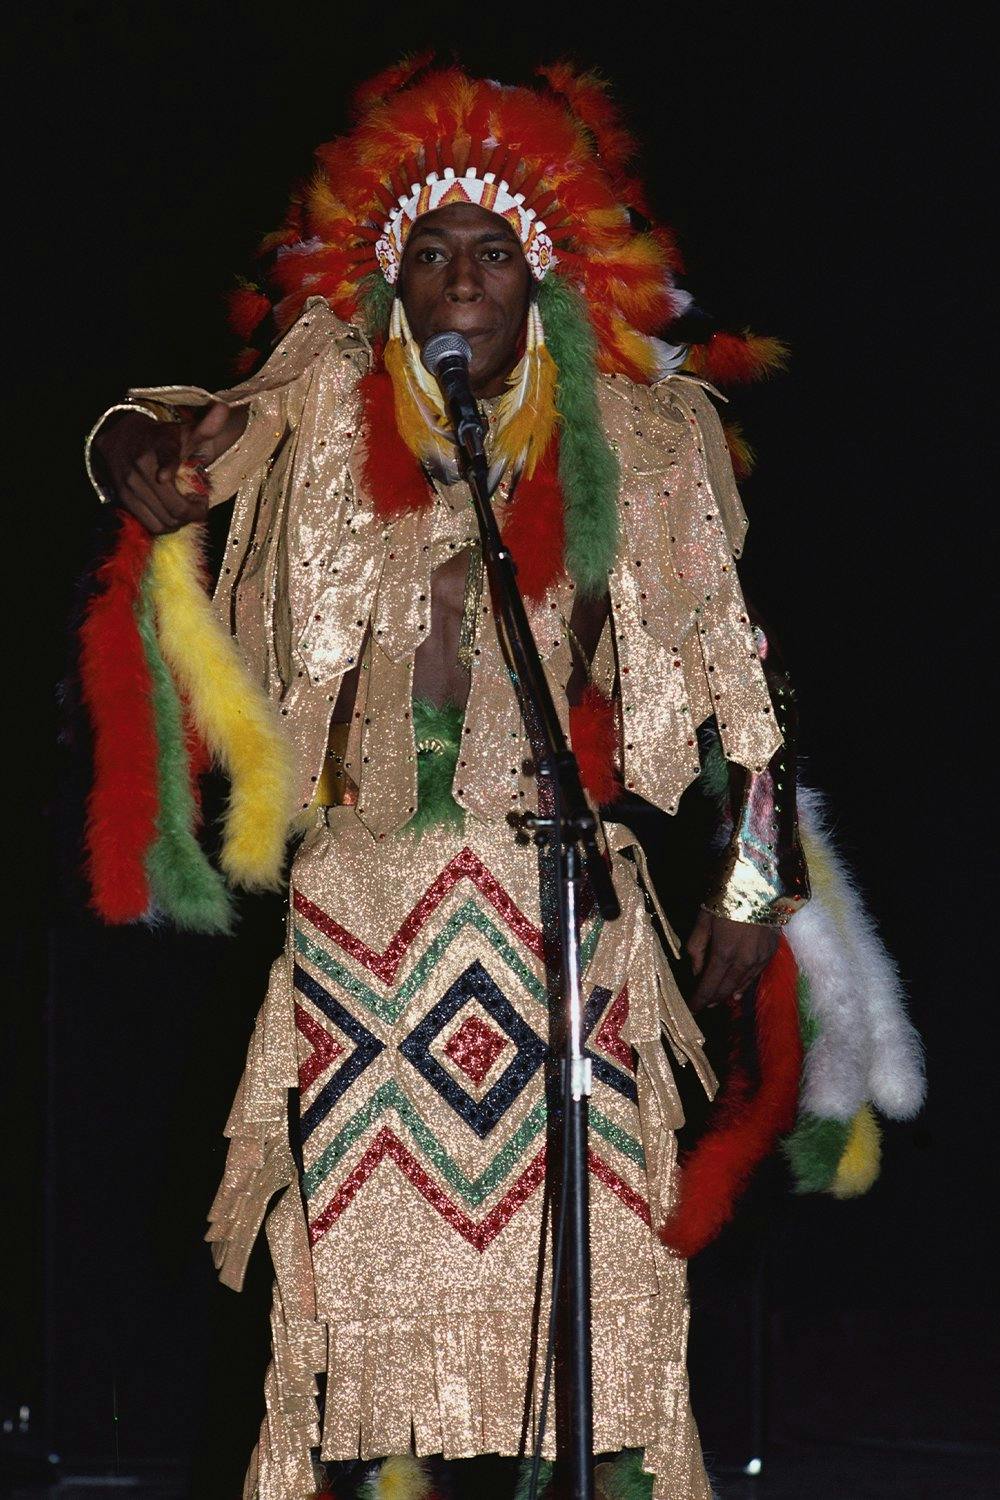 Pow Wow of Soul Sonic Force wears a Native American costume on stage. (Photo by Geoff Butler/Corbis/VCG via Getty Images)